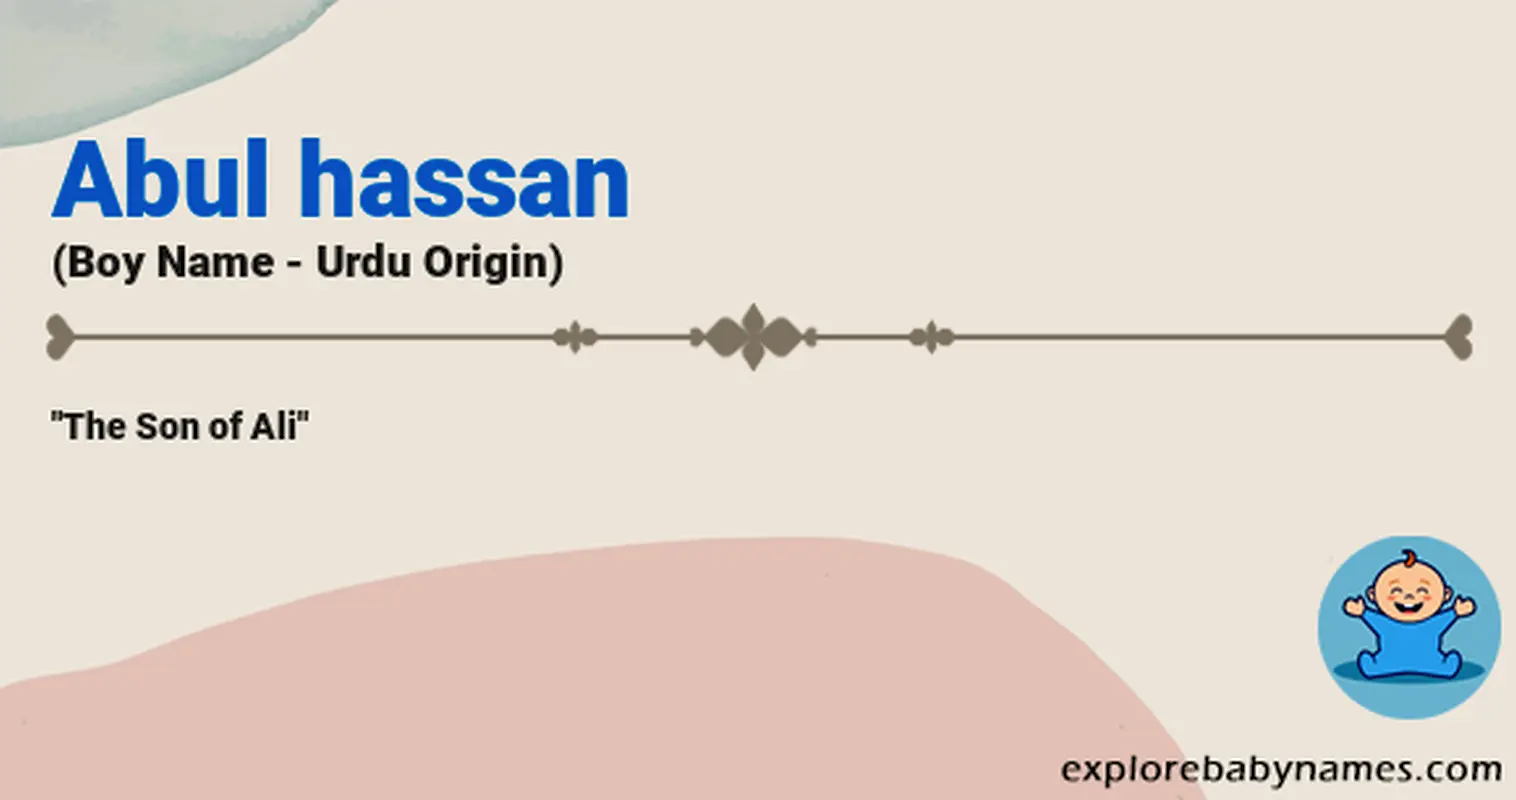 Meaning of Abul hassan